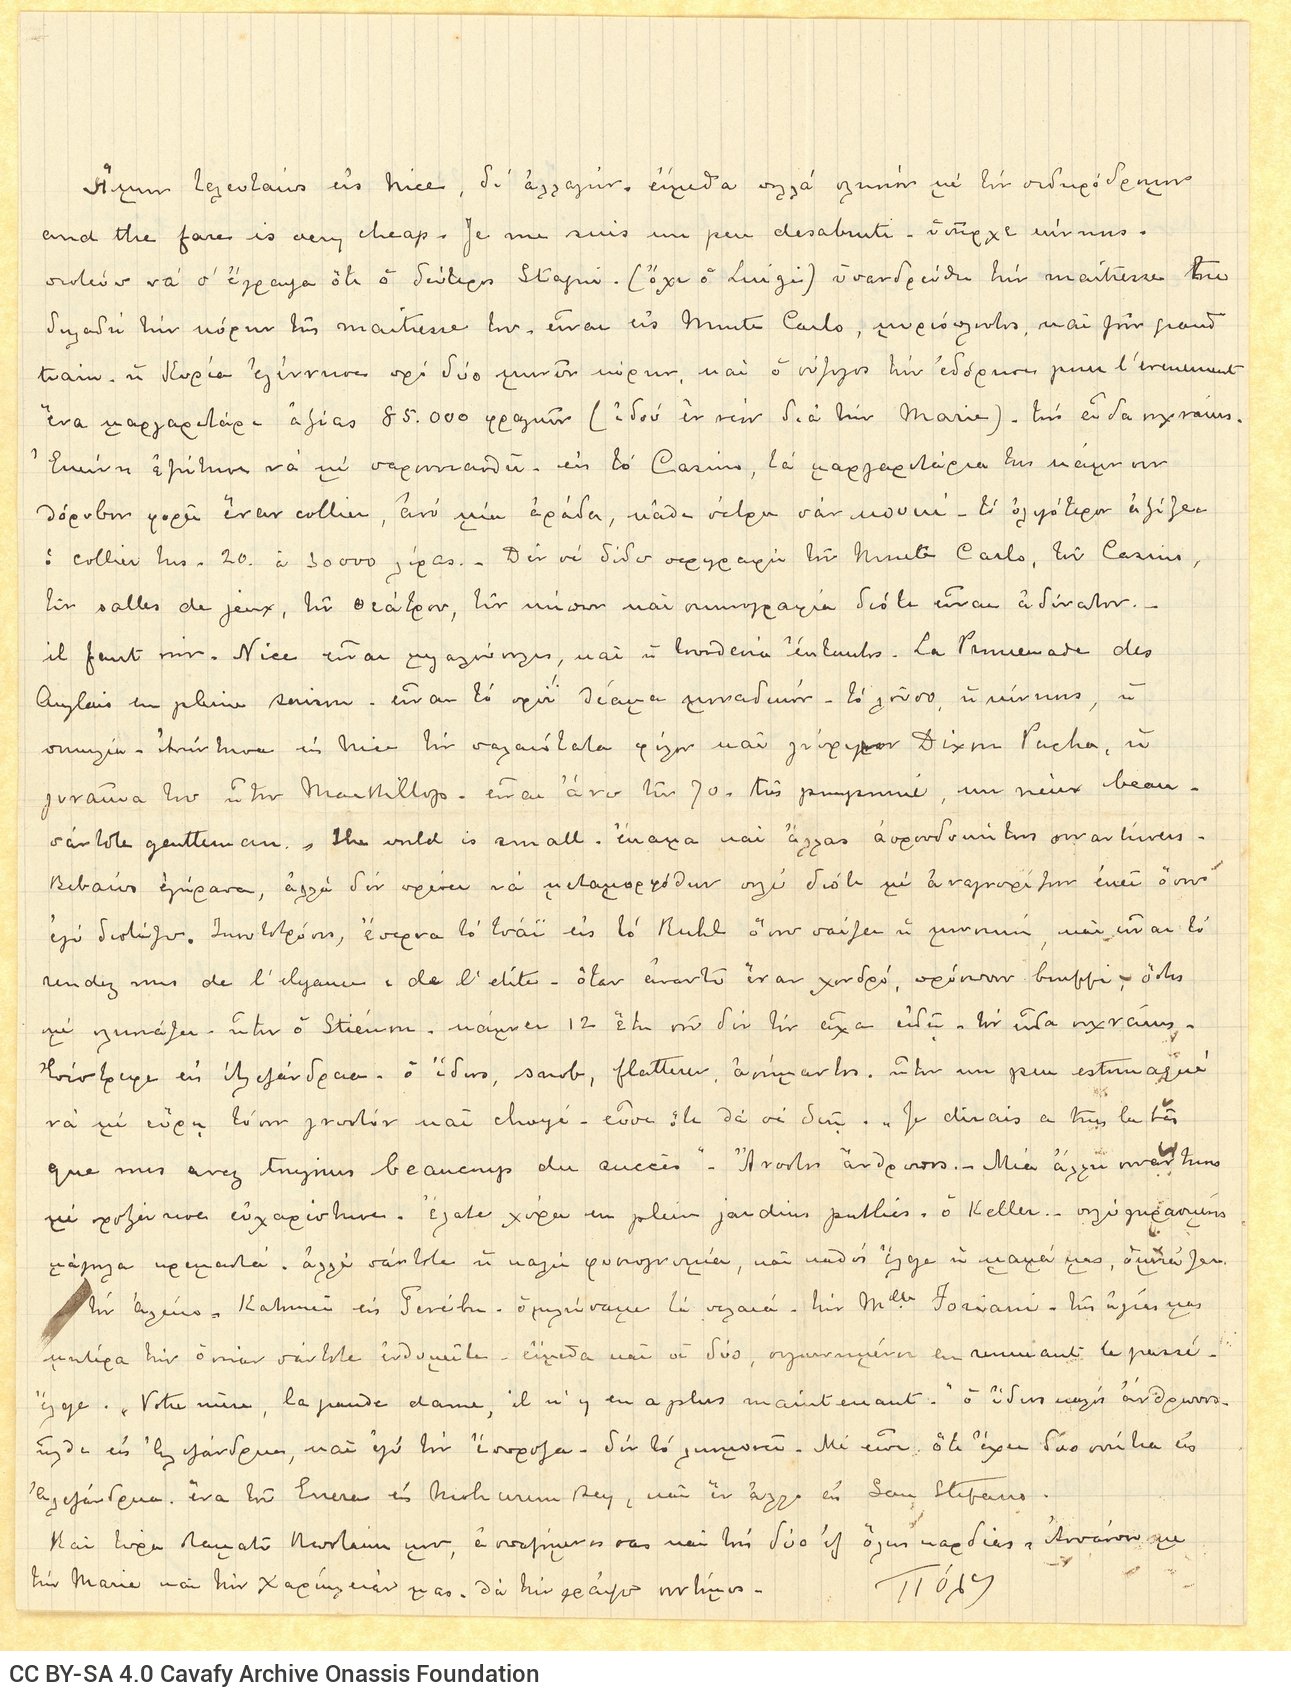 Handwritten diary-type letter by Paul Cavafy to C. P. Cavafy from Hyères, France, written over three days, in a bifolio with